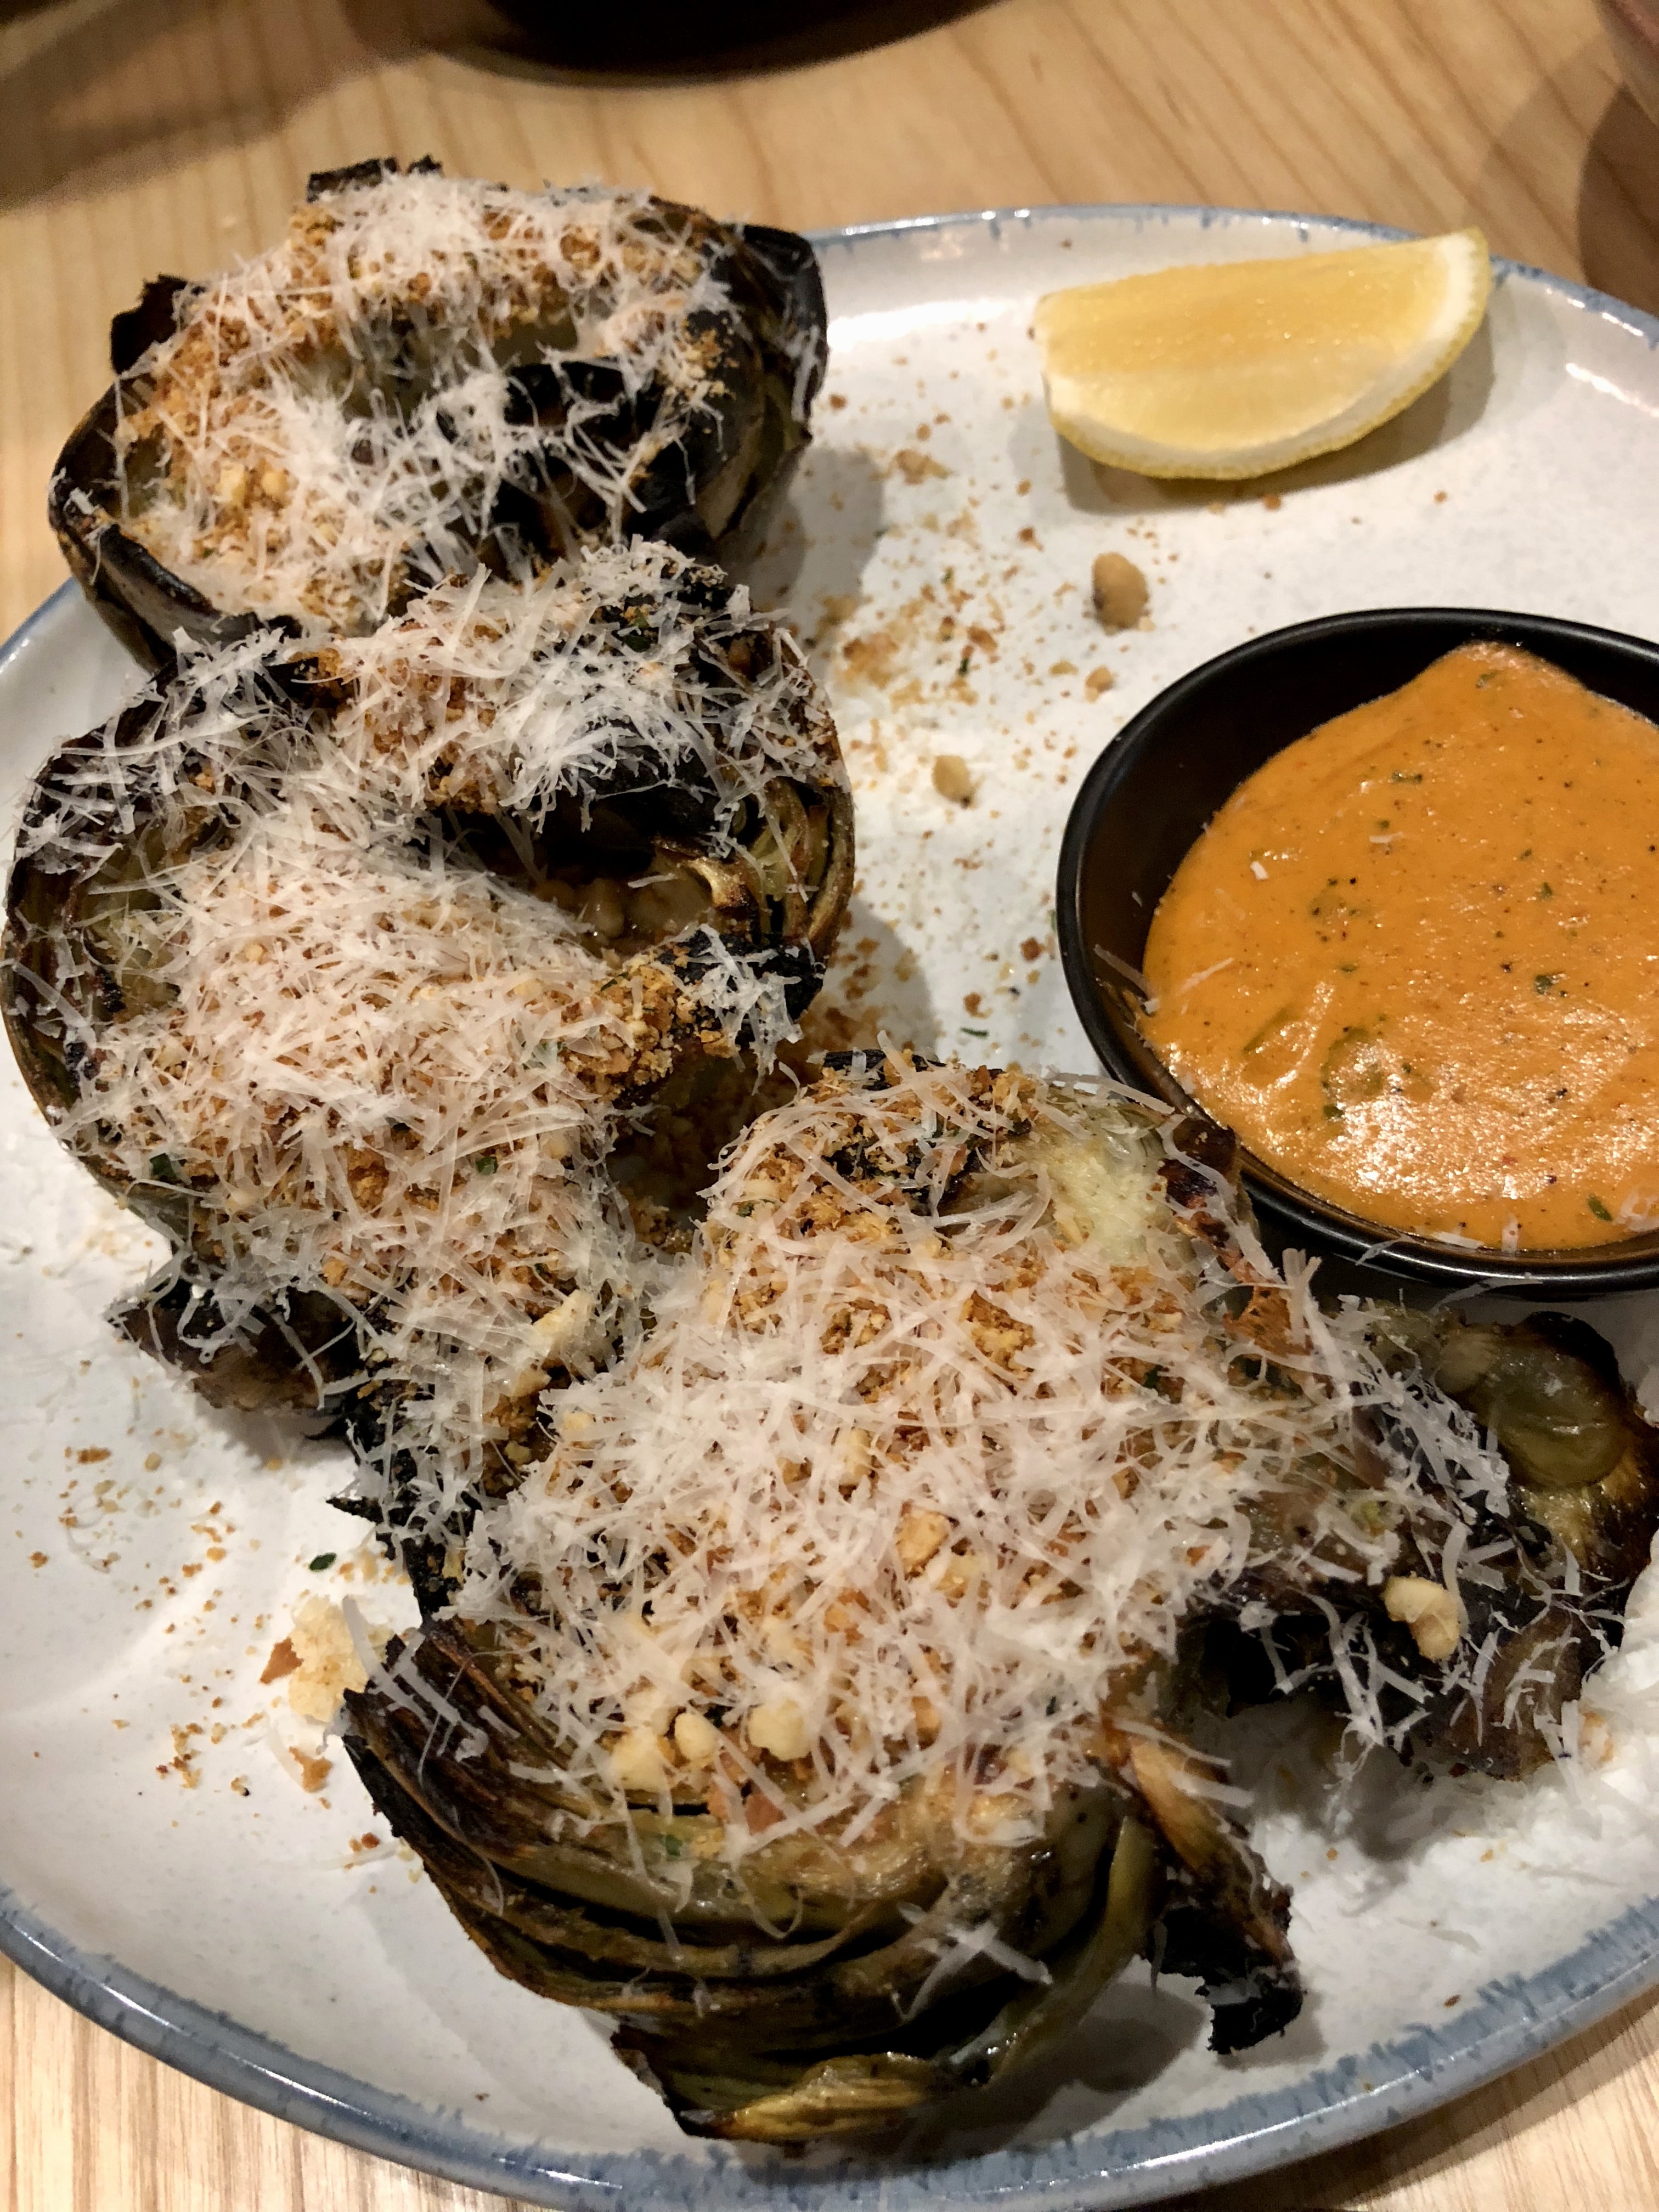 Wood Grilled Artichokes